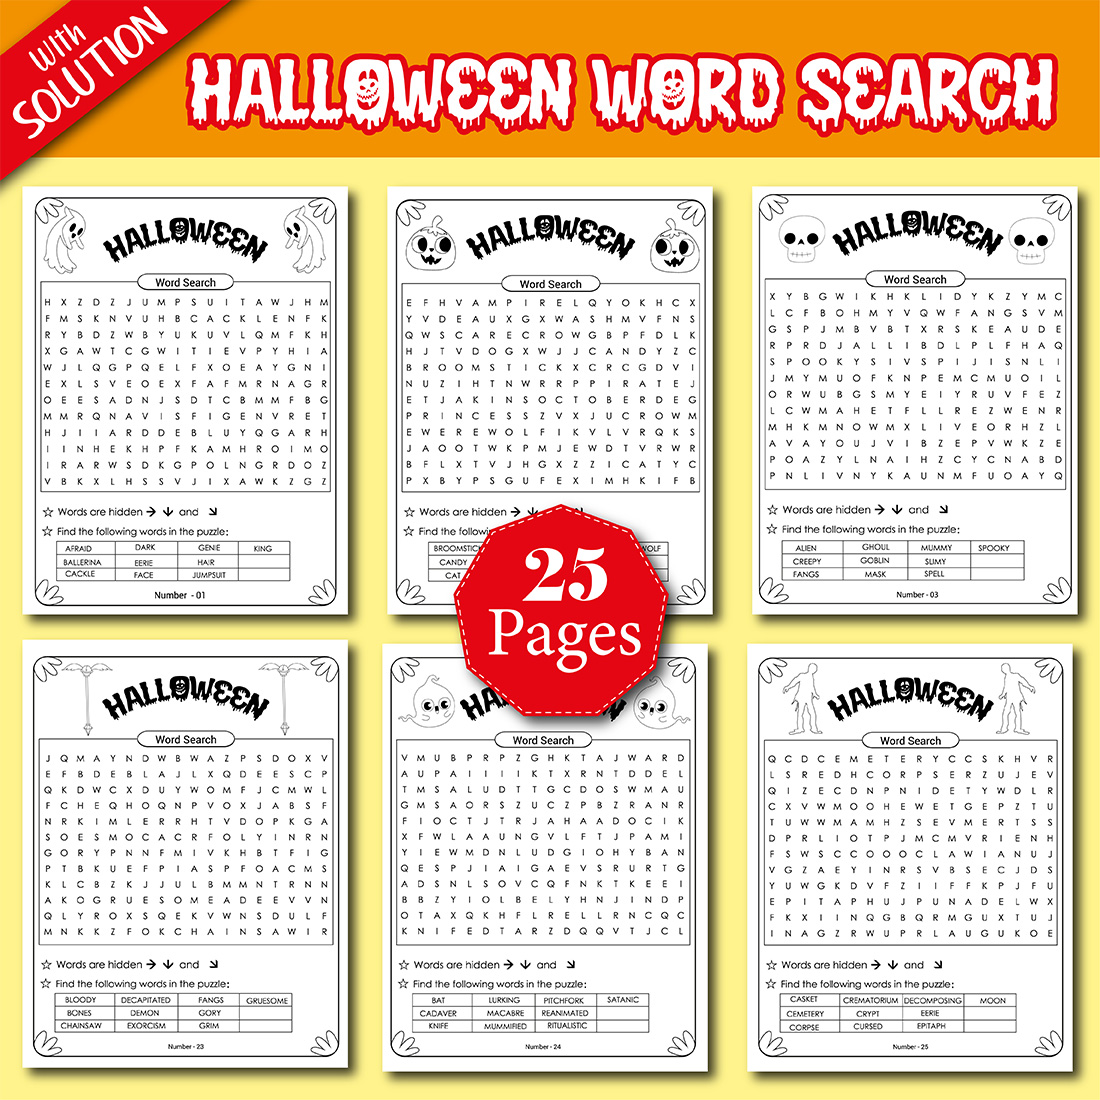 25 Pages Halloween Word Search Puzzle Activity Book cover image.